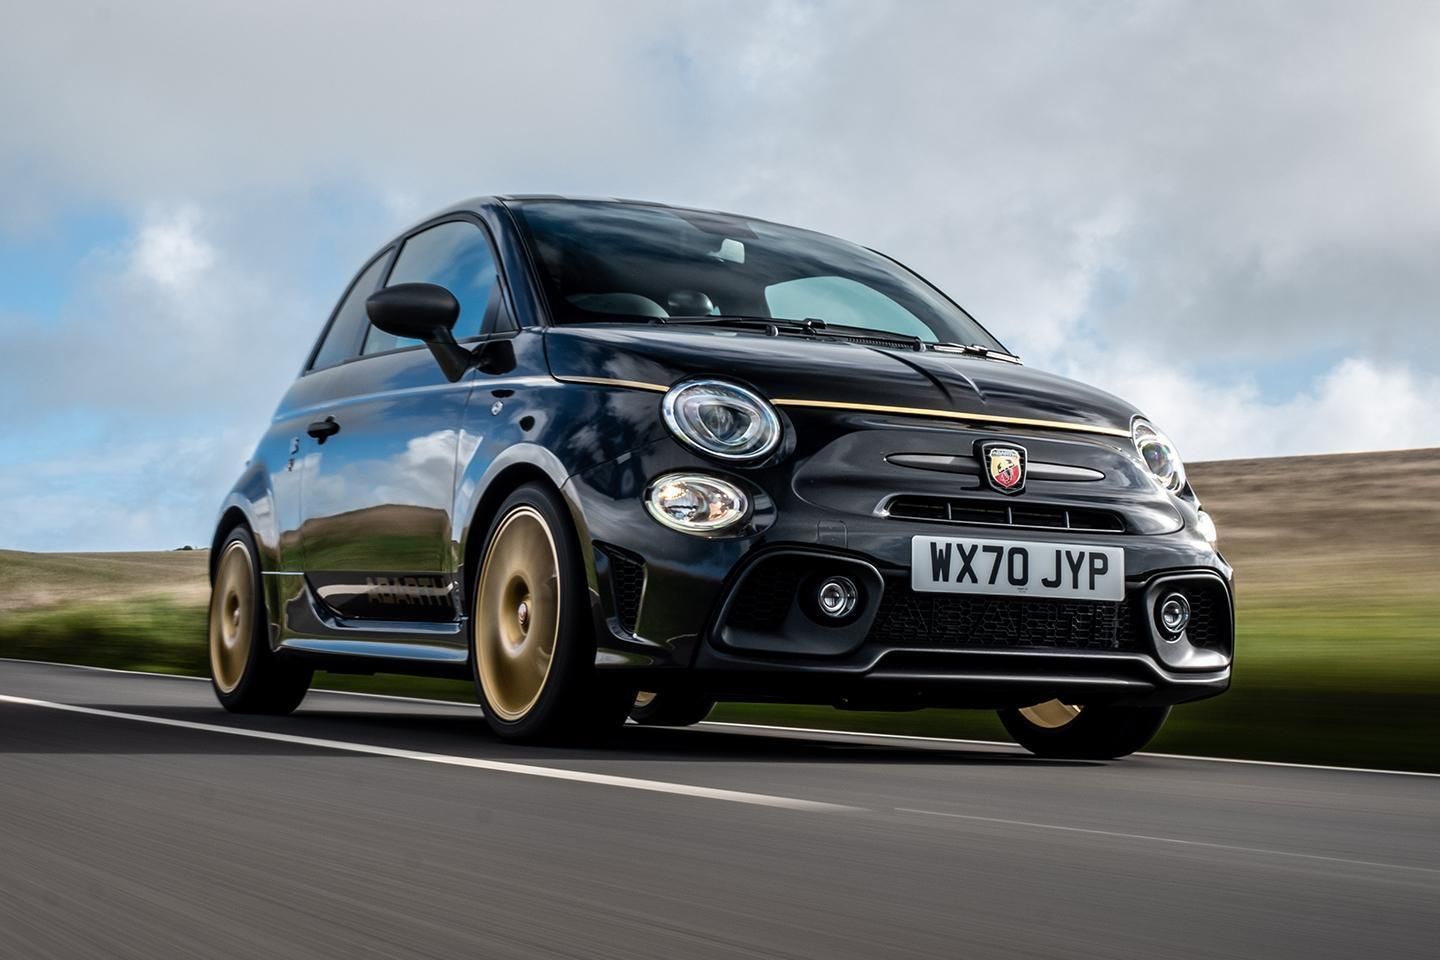 Fiat Abarth 595 Competizione review, test drive - Introduction